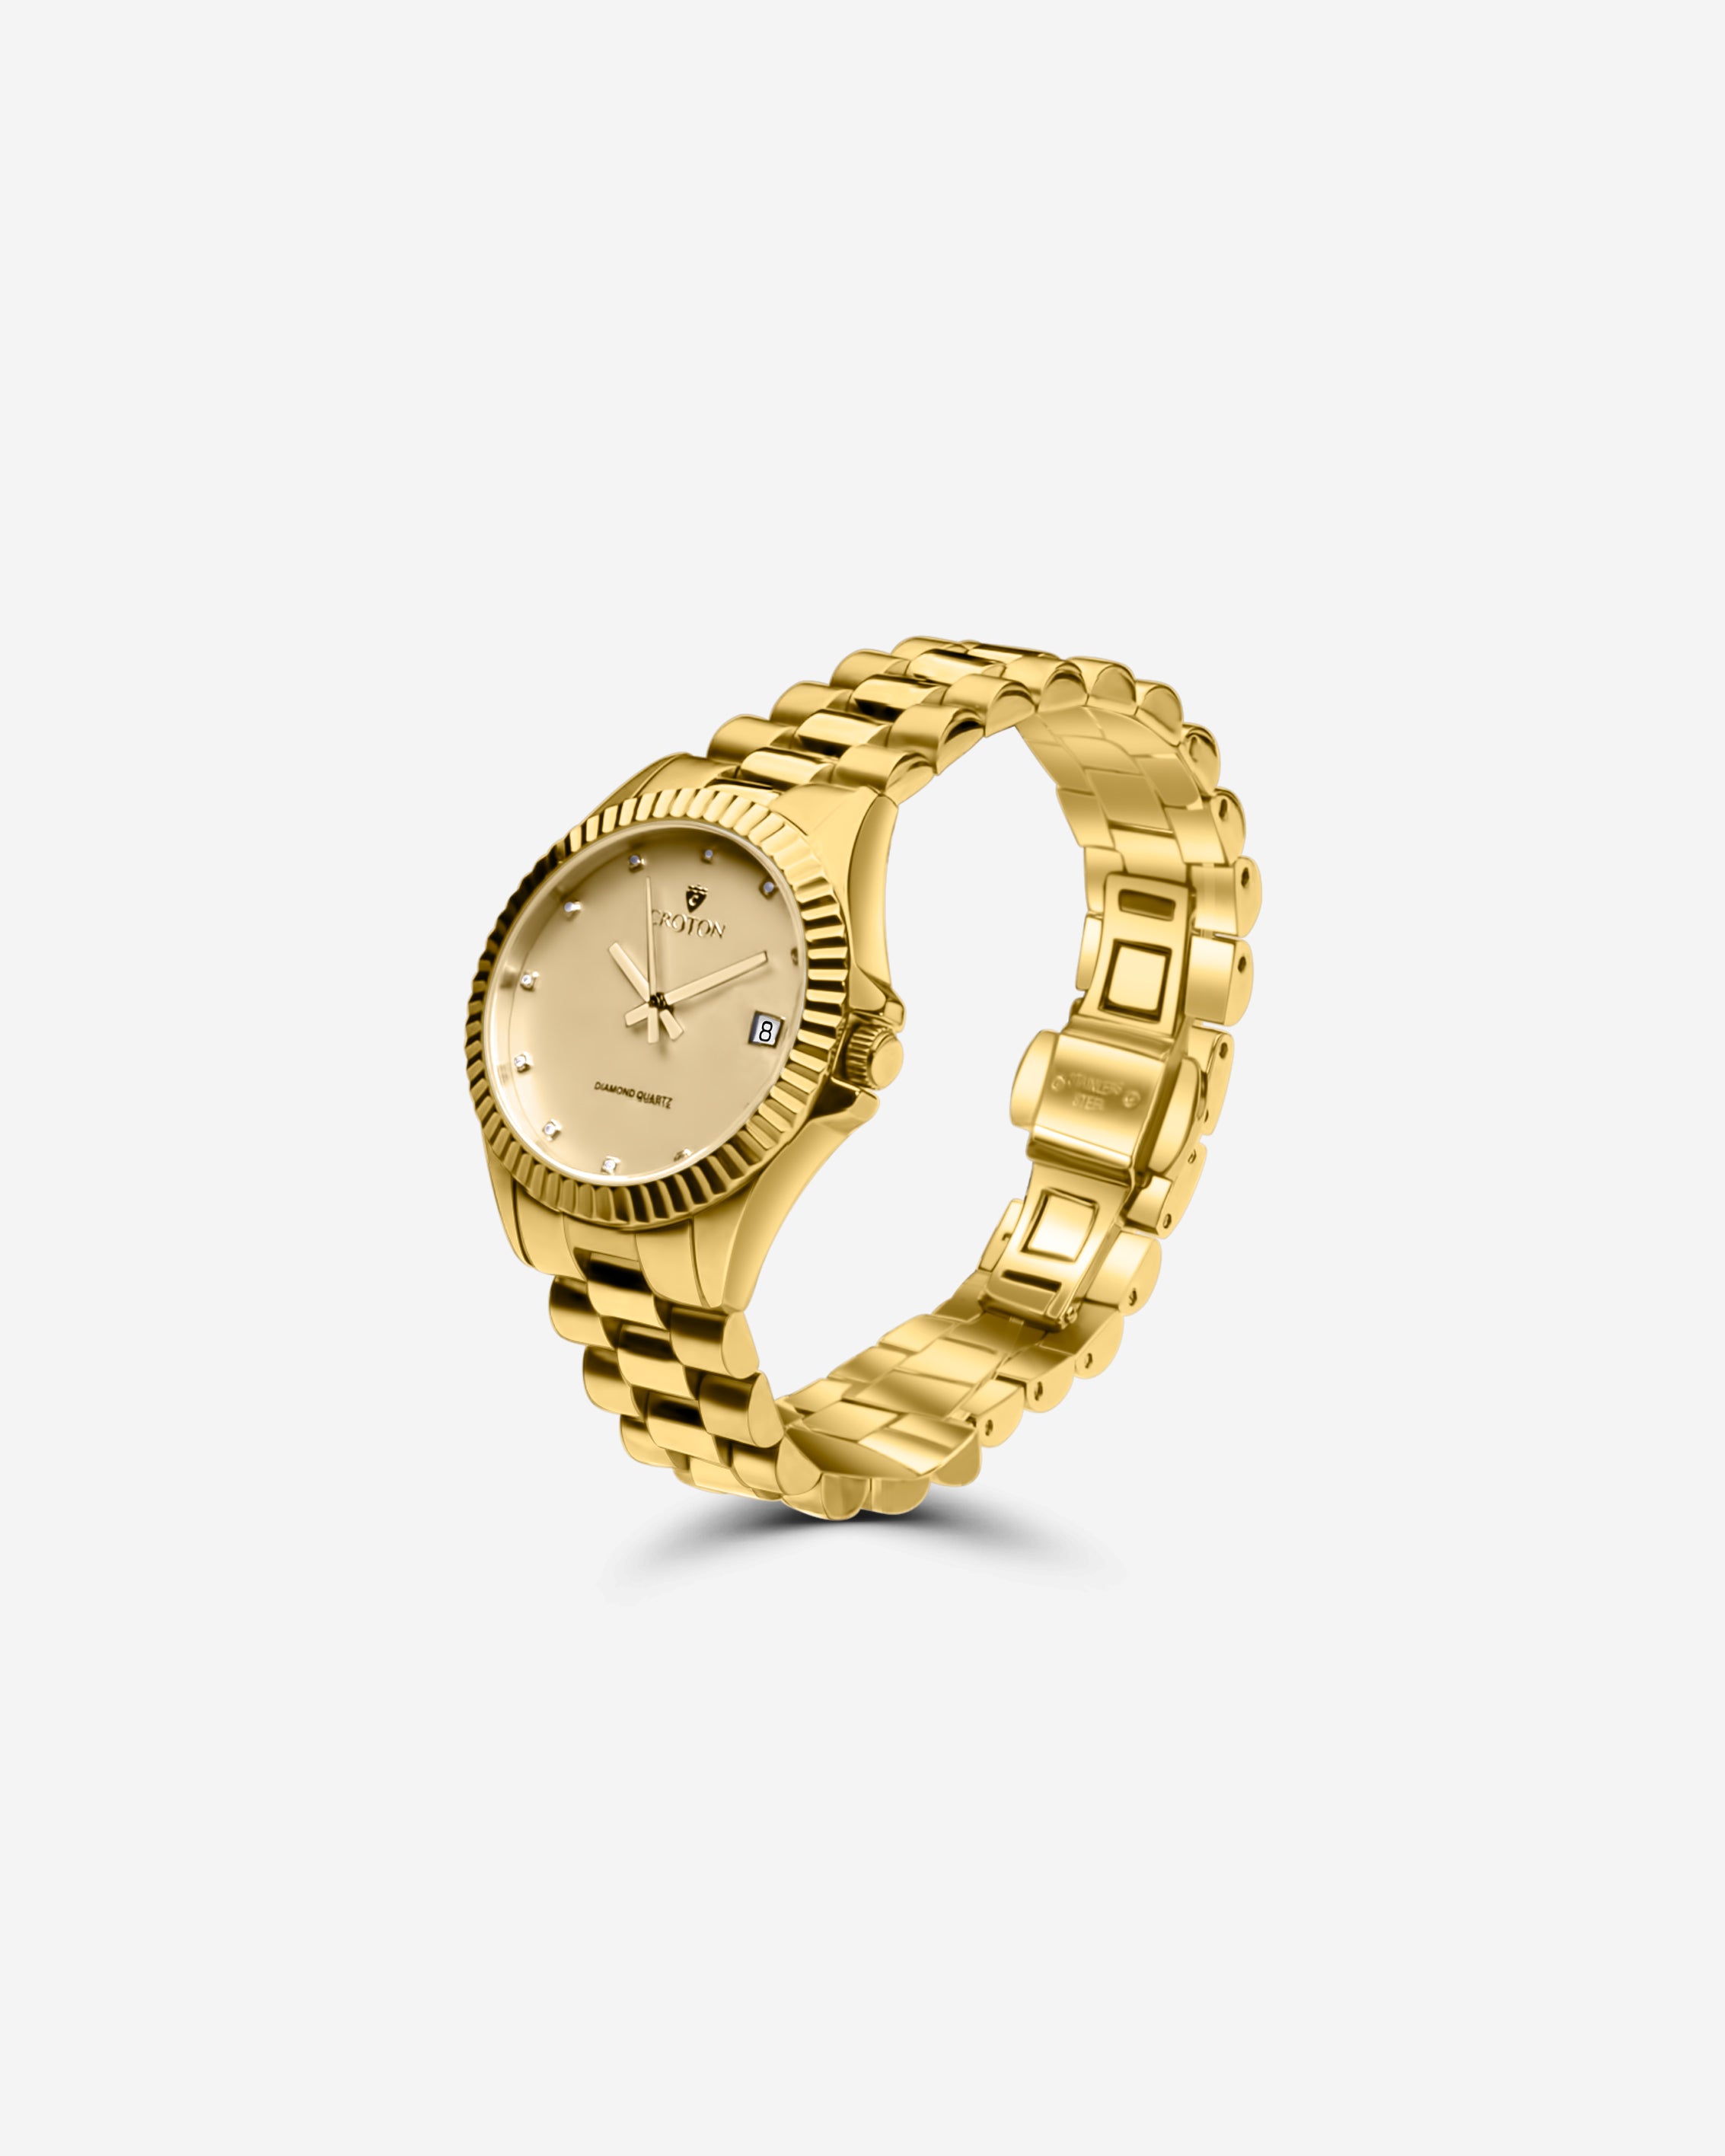 THE SAV Ladies Goldtone 11 Diamond Marker Watch with Magnified Date